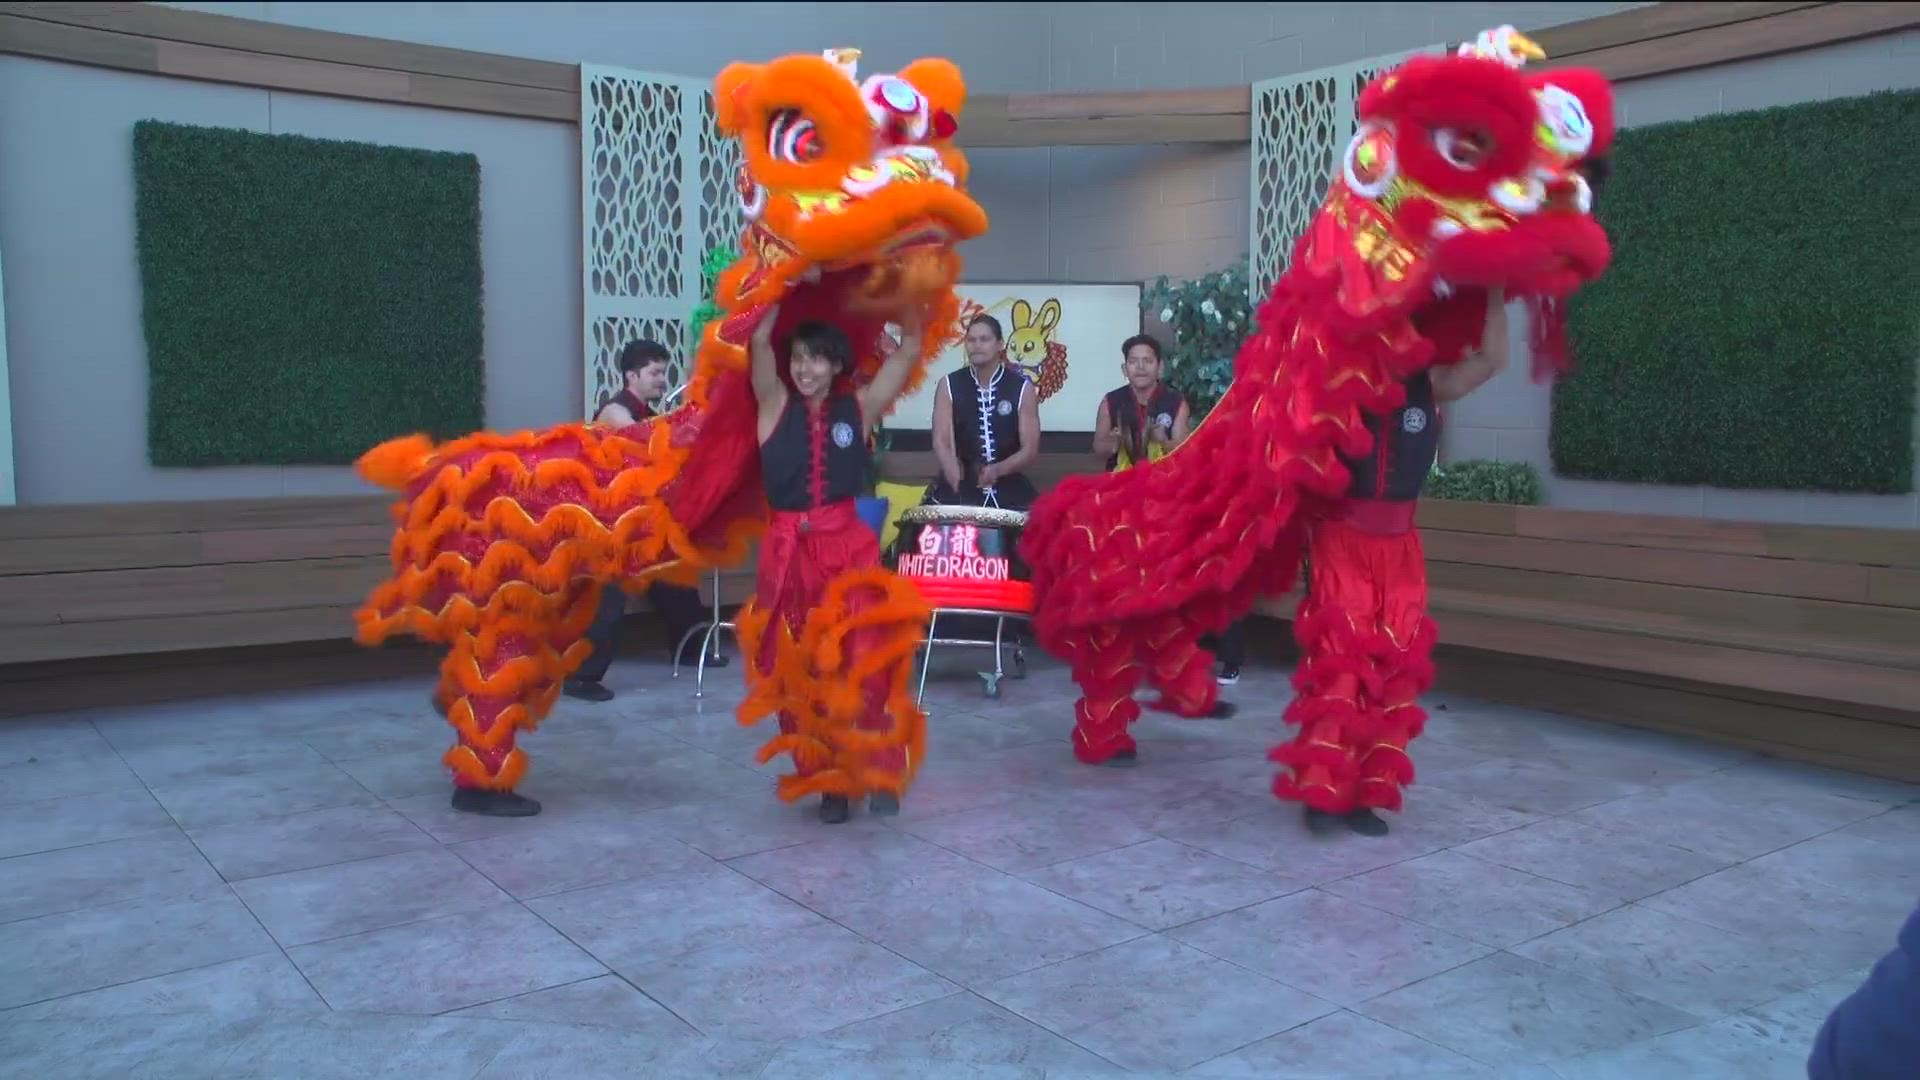 We get a sneak peek into the 40th annual San Diego Chinese New Year Fair that is taking place this Saturday and Sunday.